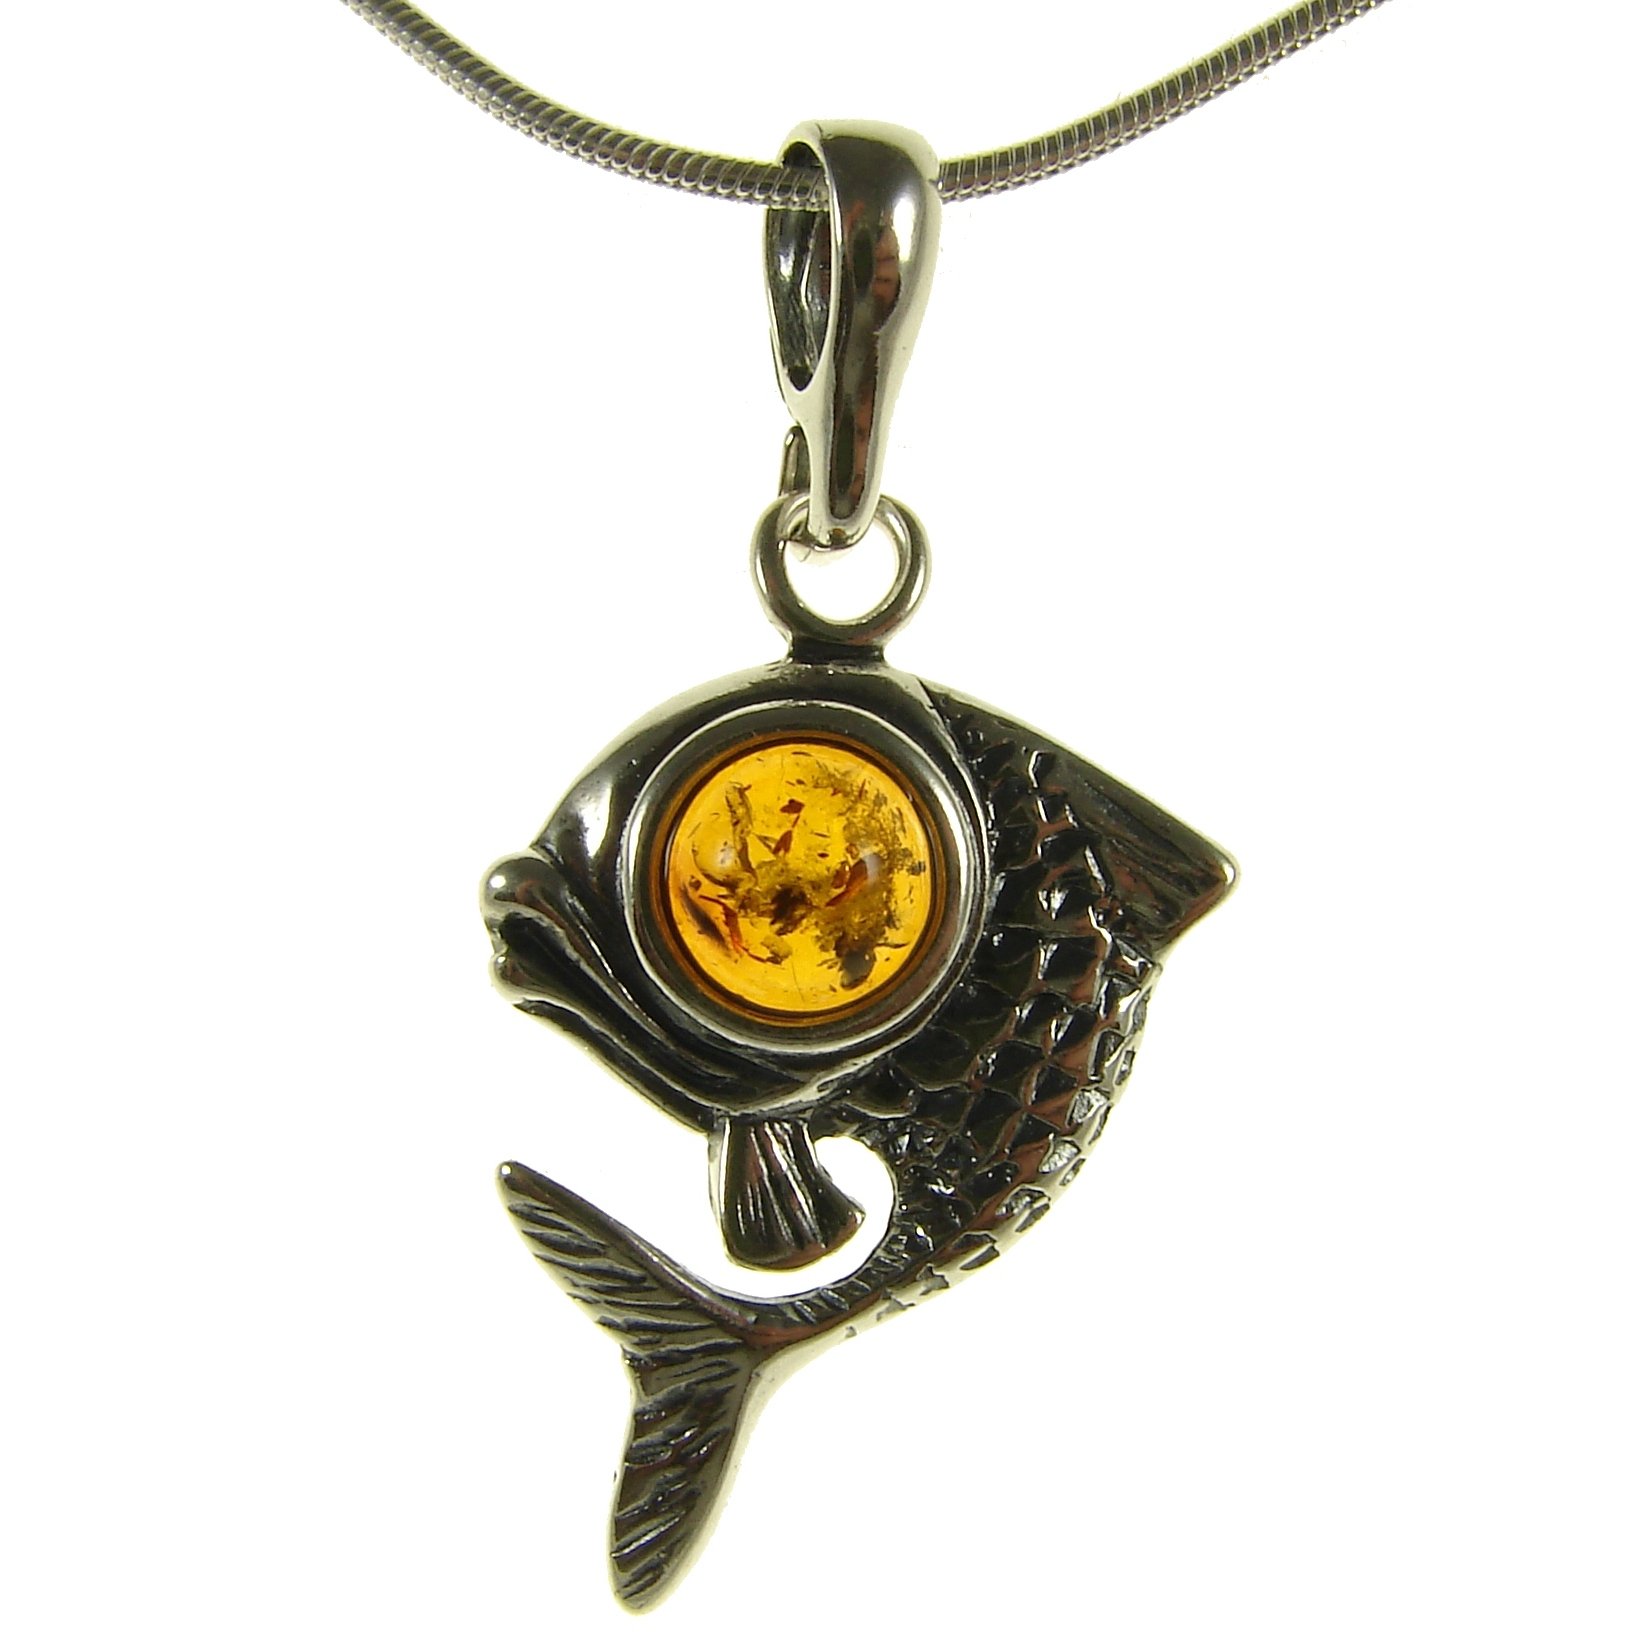 BALTIC AMBER AND STERLING SILVER 925 FISH ANIMAL PENDANT NECKLACE - 10 12 14 16 18 20 22 24 26 28 30 32 34 36 38 40